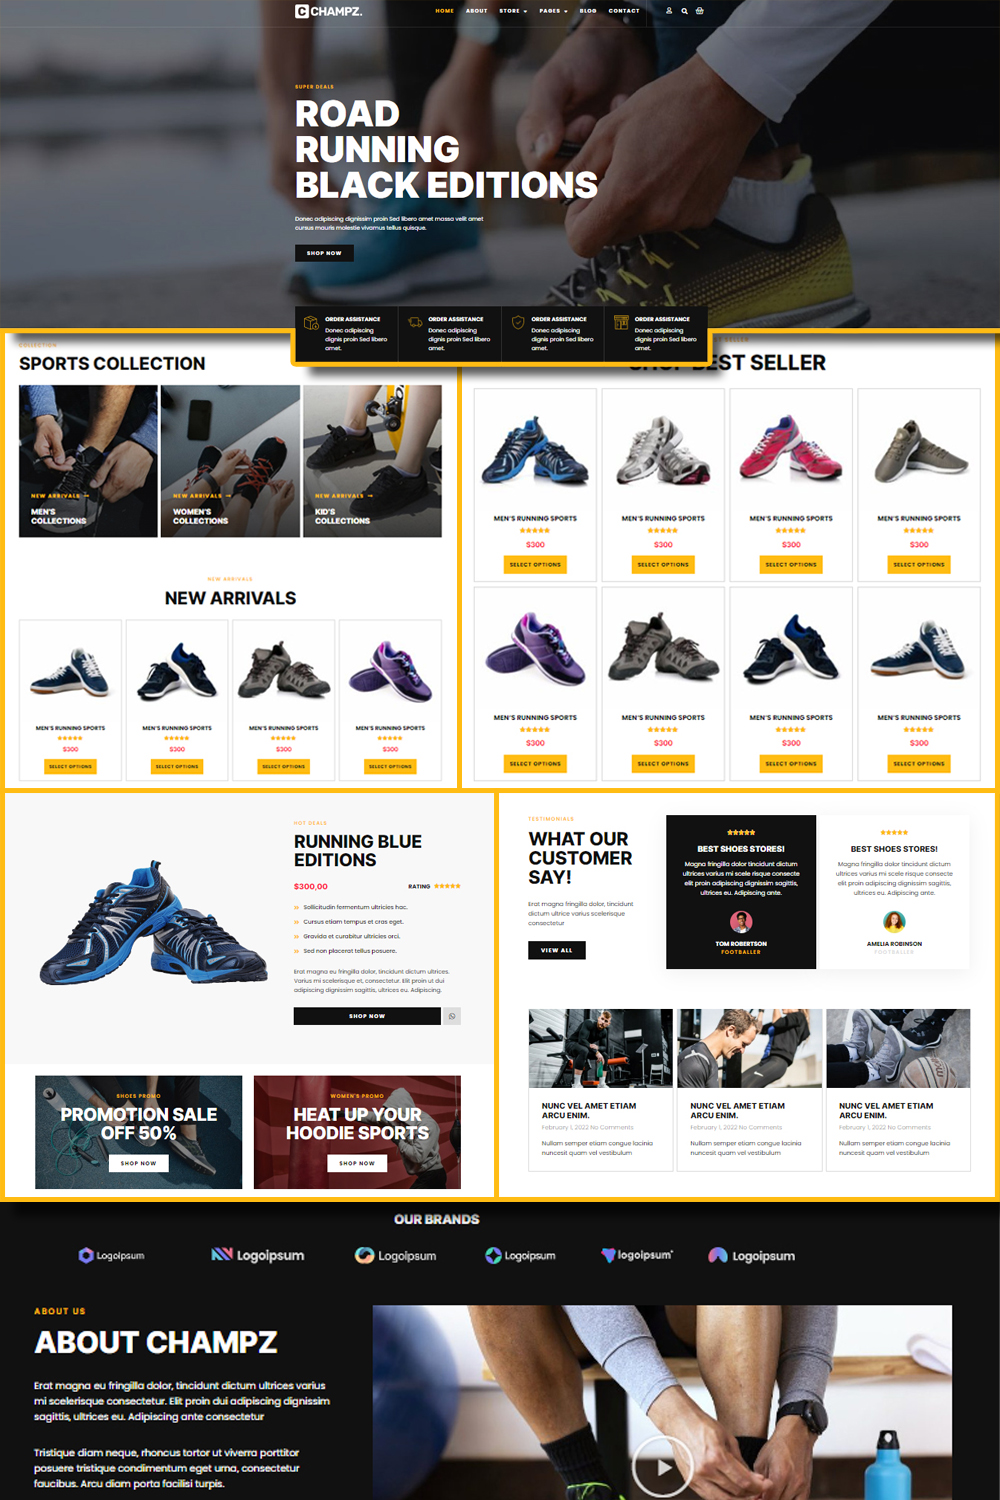 Illustrations champz sneakers sports apparel online store template kit of pinterest.